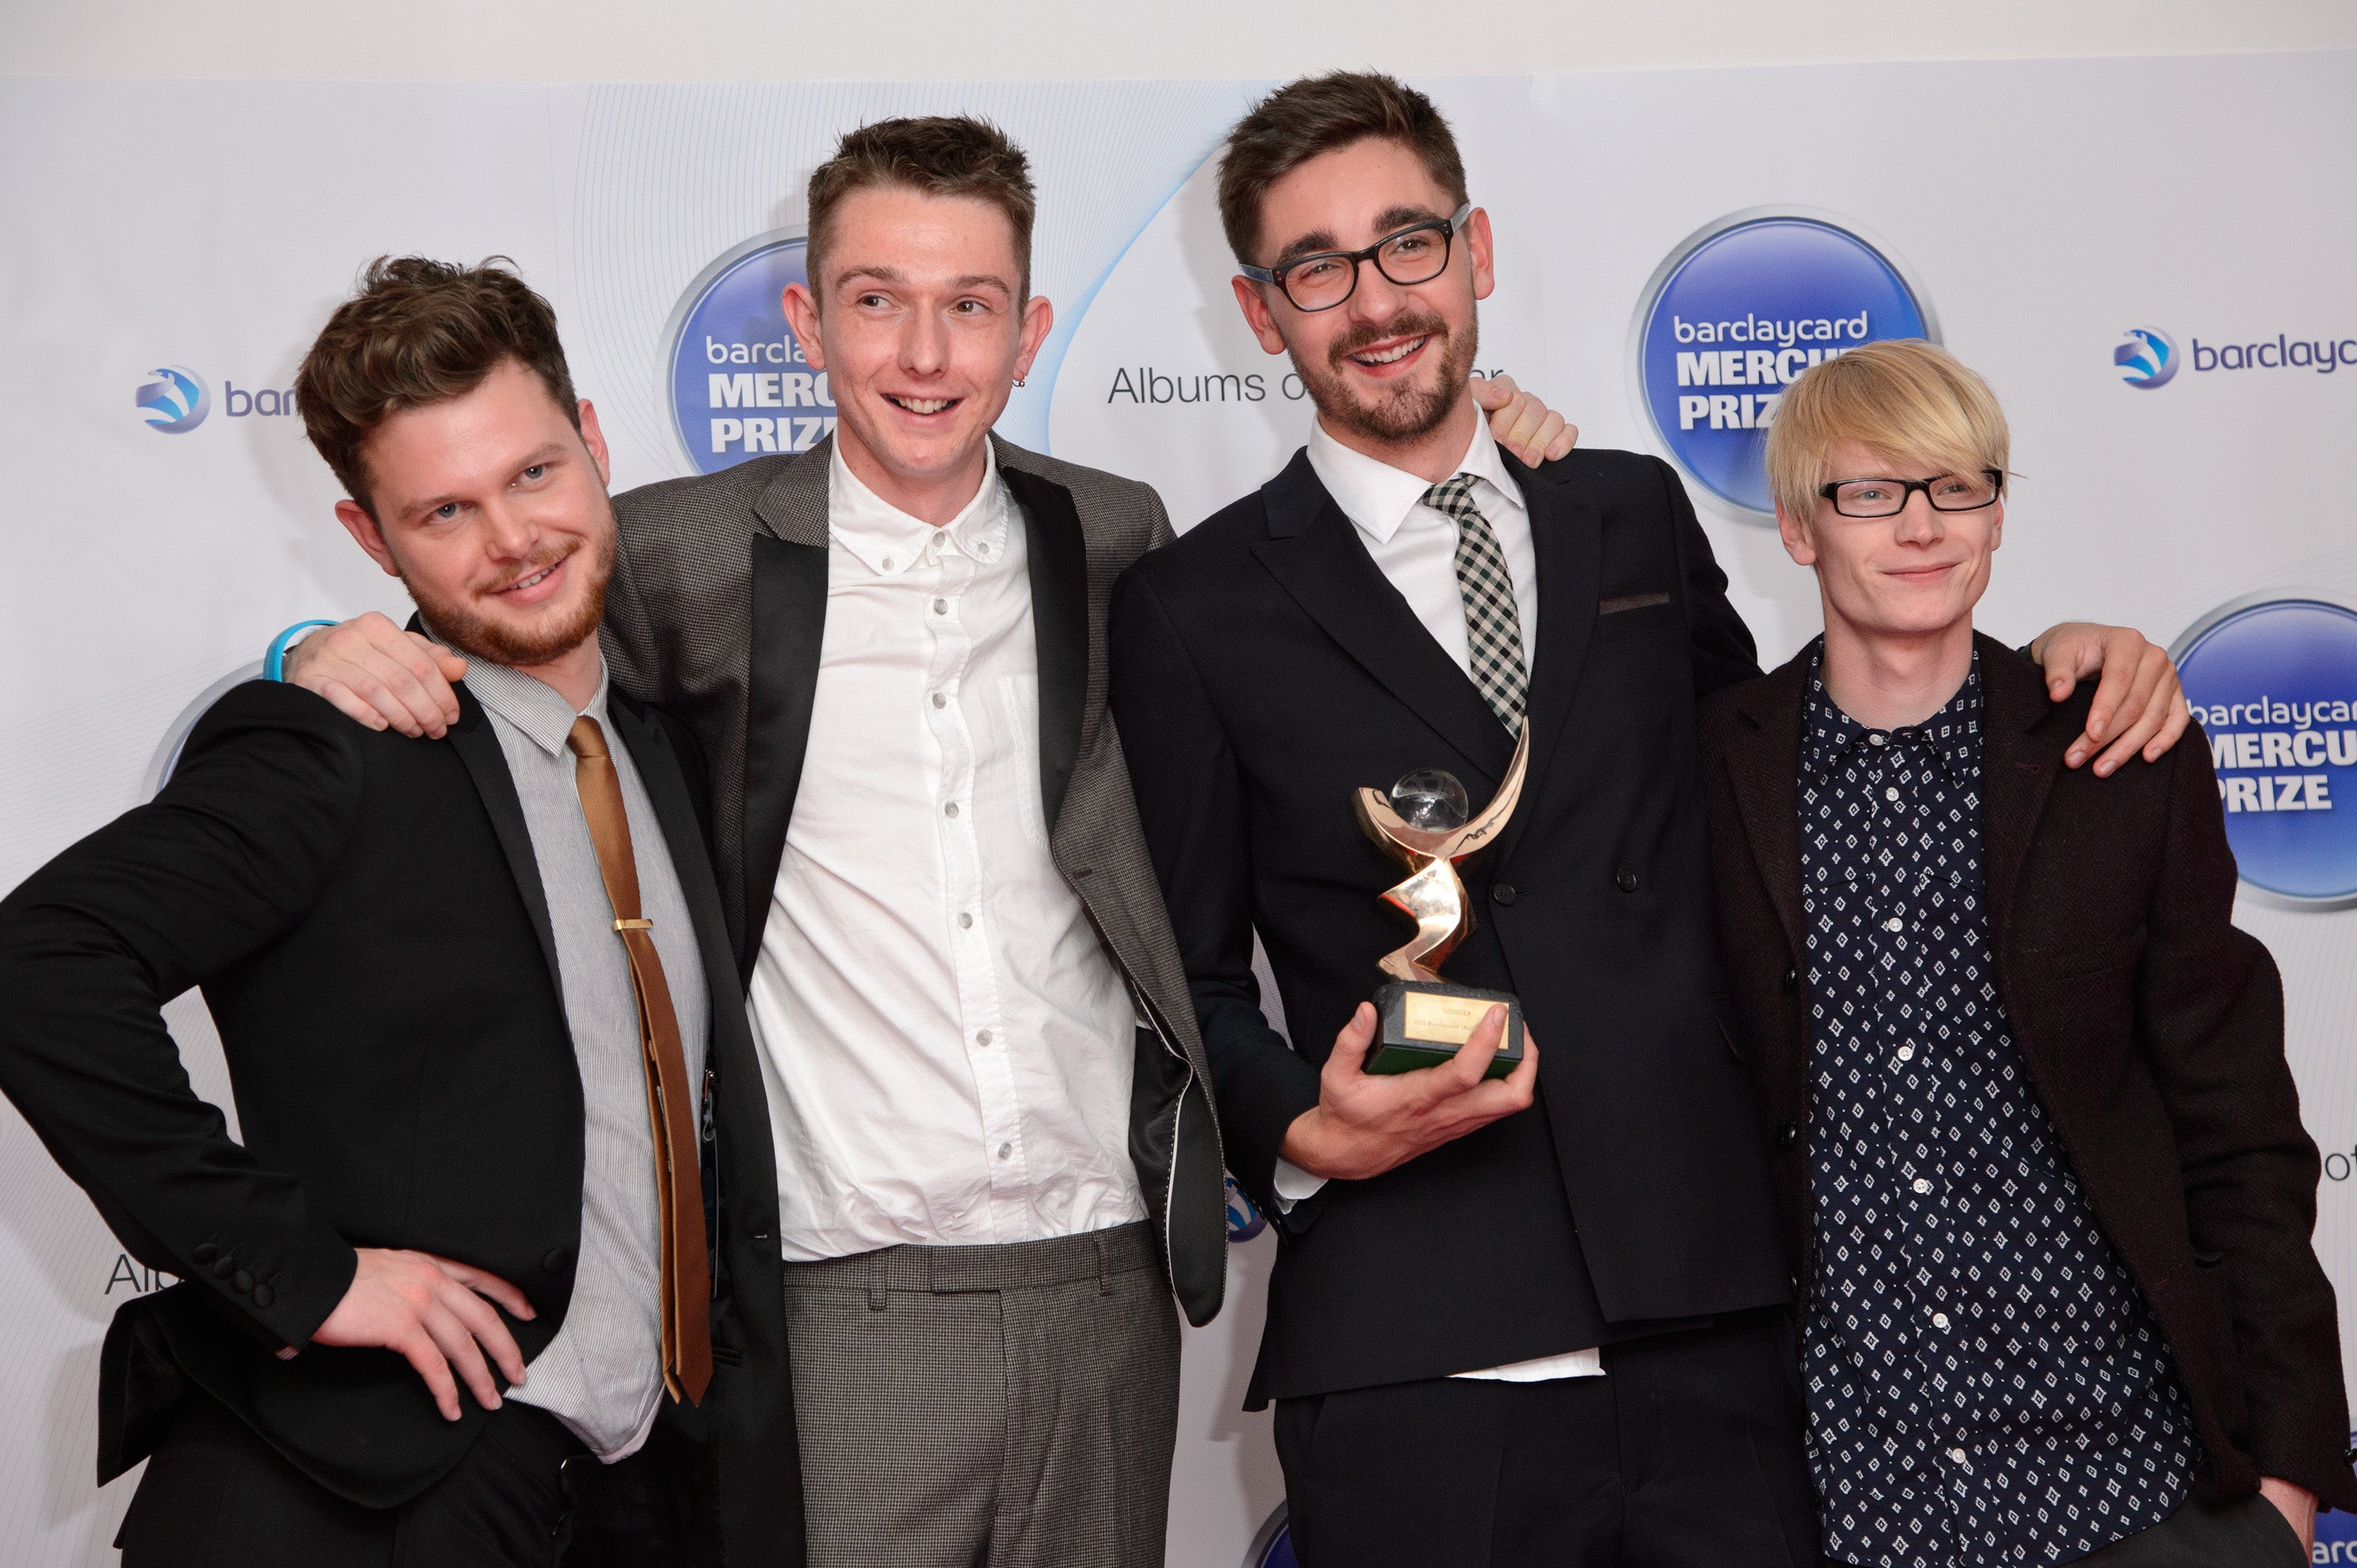 Joe Newman, Gwil Sainsbury, Thom Green and Gus Unger-Hamilton of Alt-J after winning the 2012 Mercury Prize